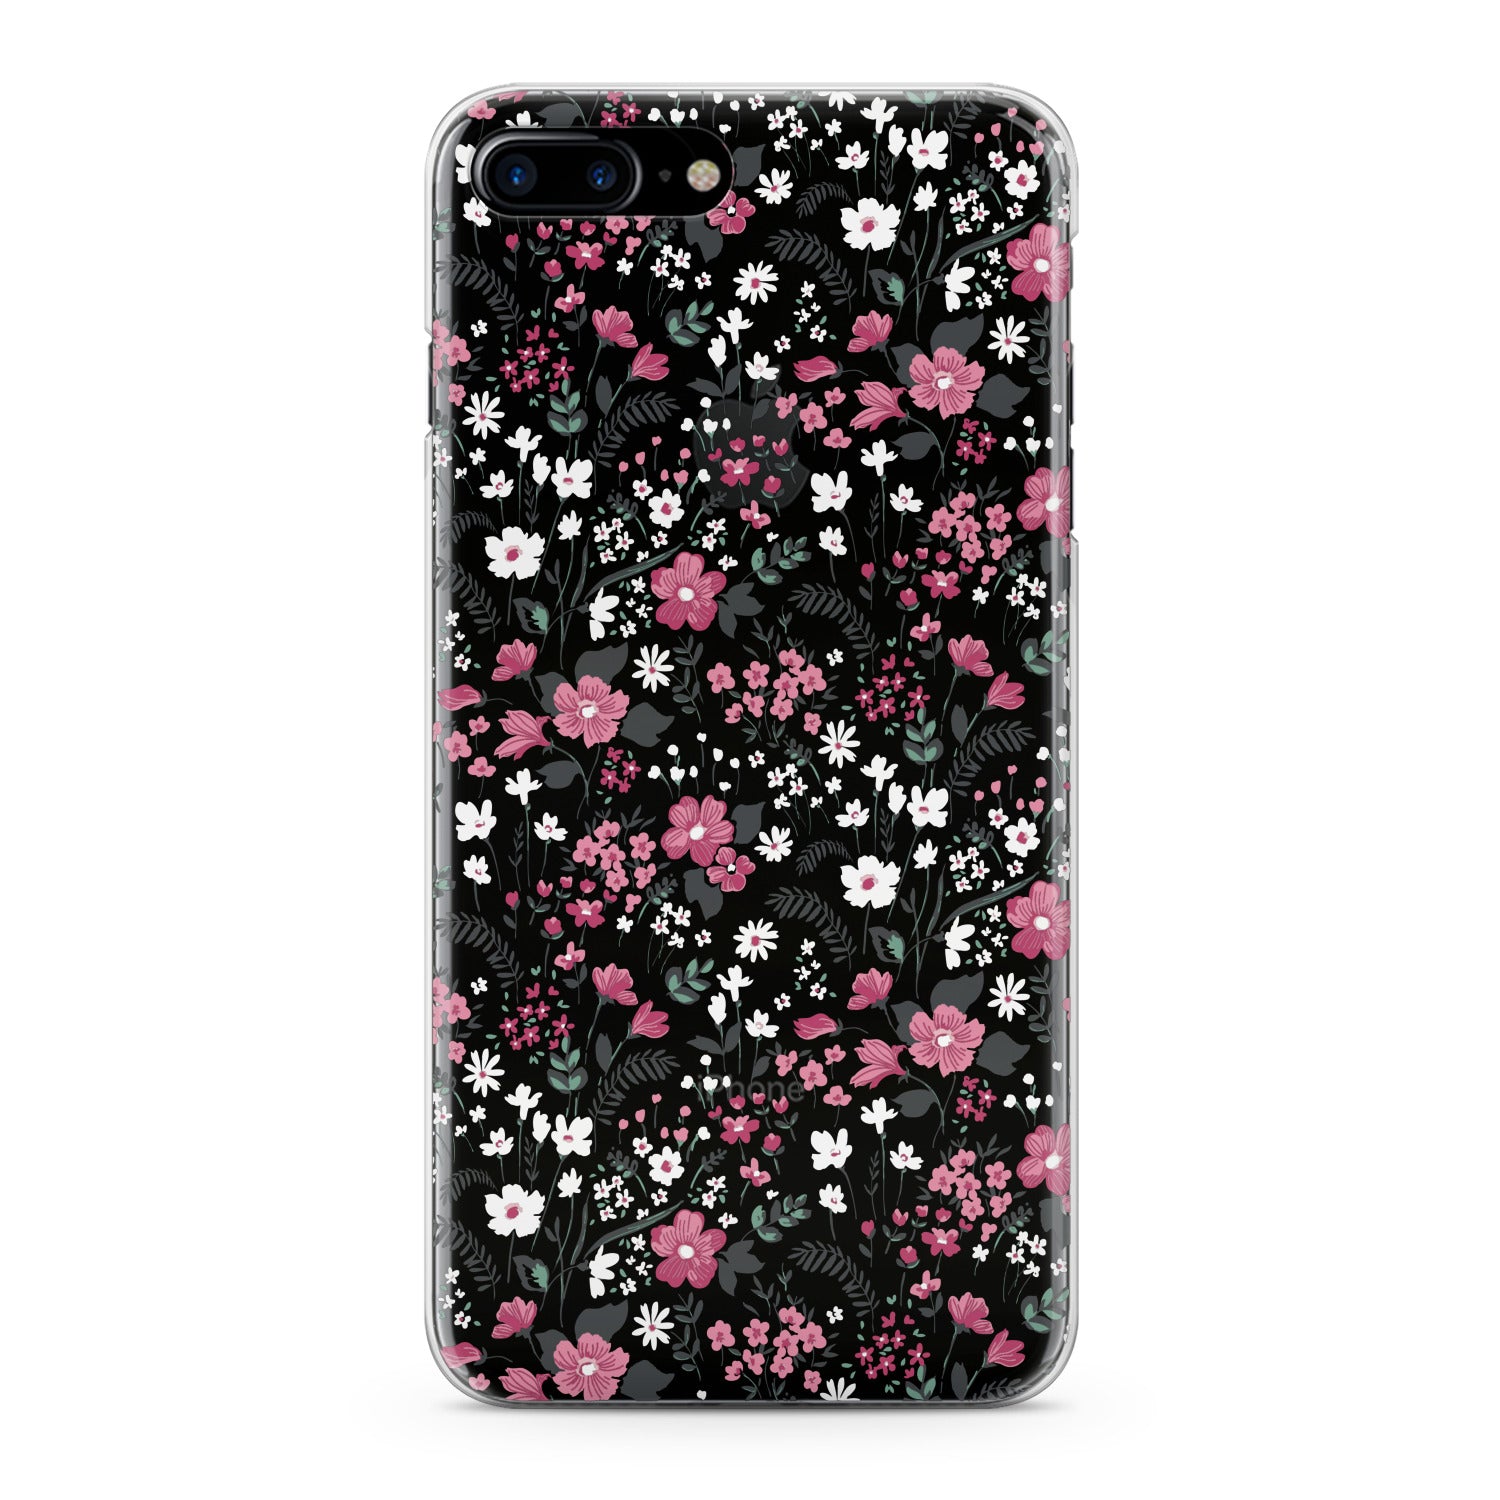 Lex Altern Gentle Pink Wildflowers Phone Case for your iPhone & Android phone.